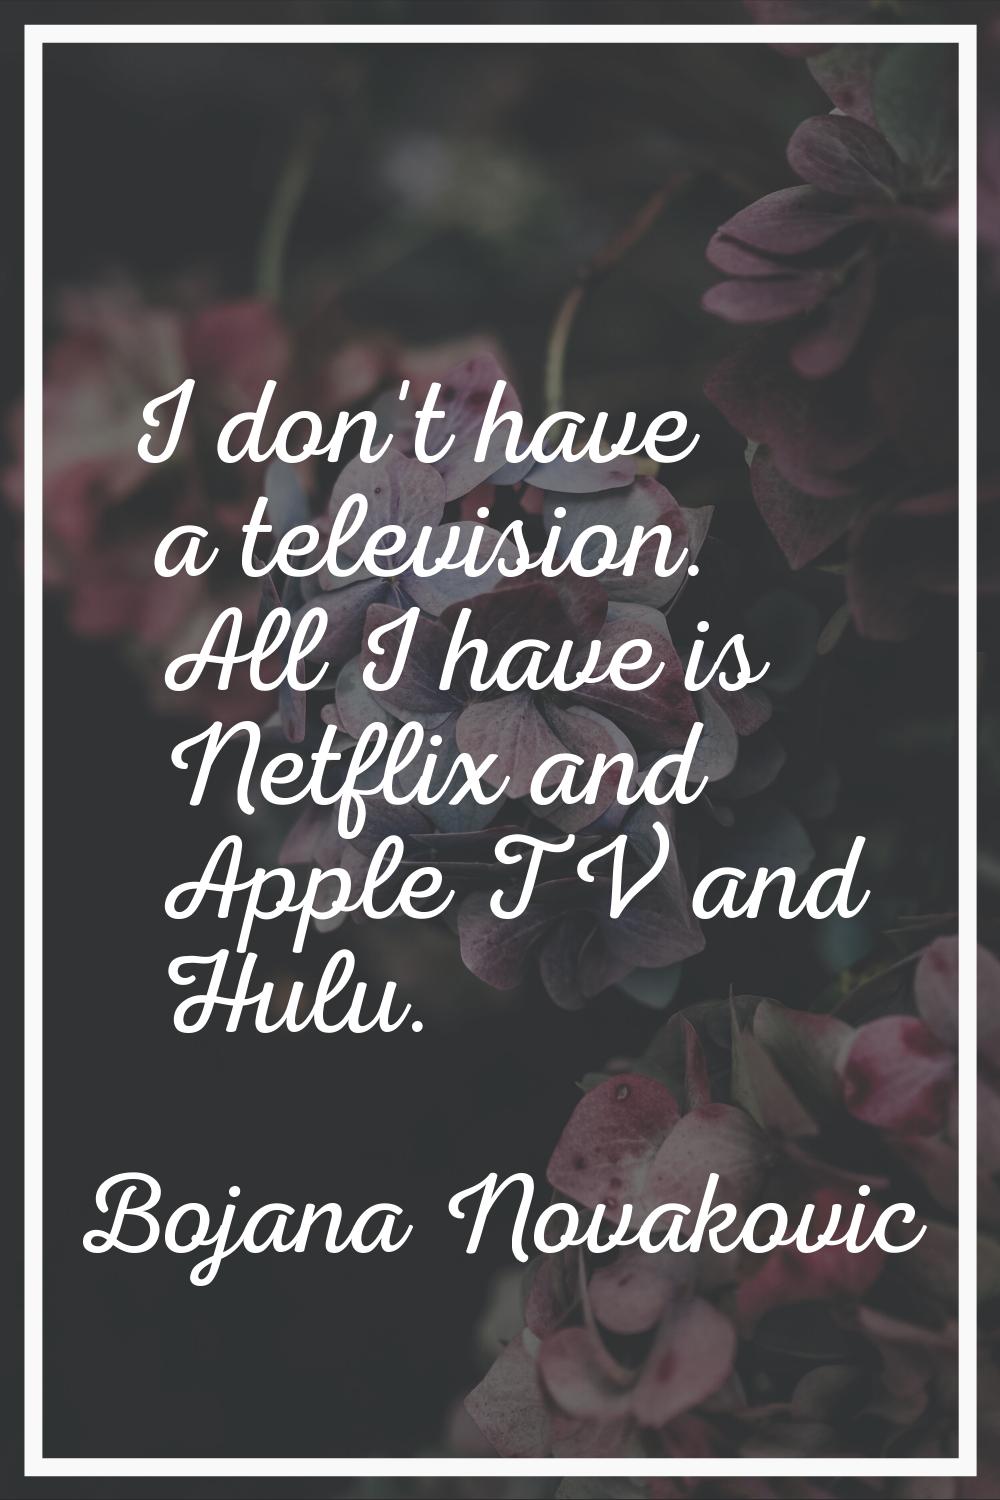 I don't have a television. All I have is Netflix and Apple TV and Hulu.